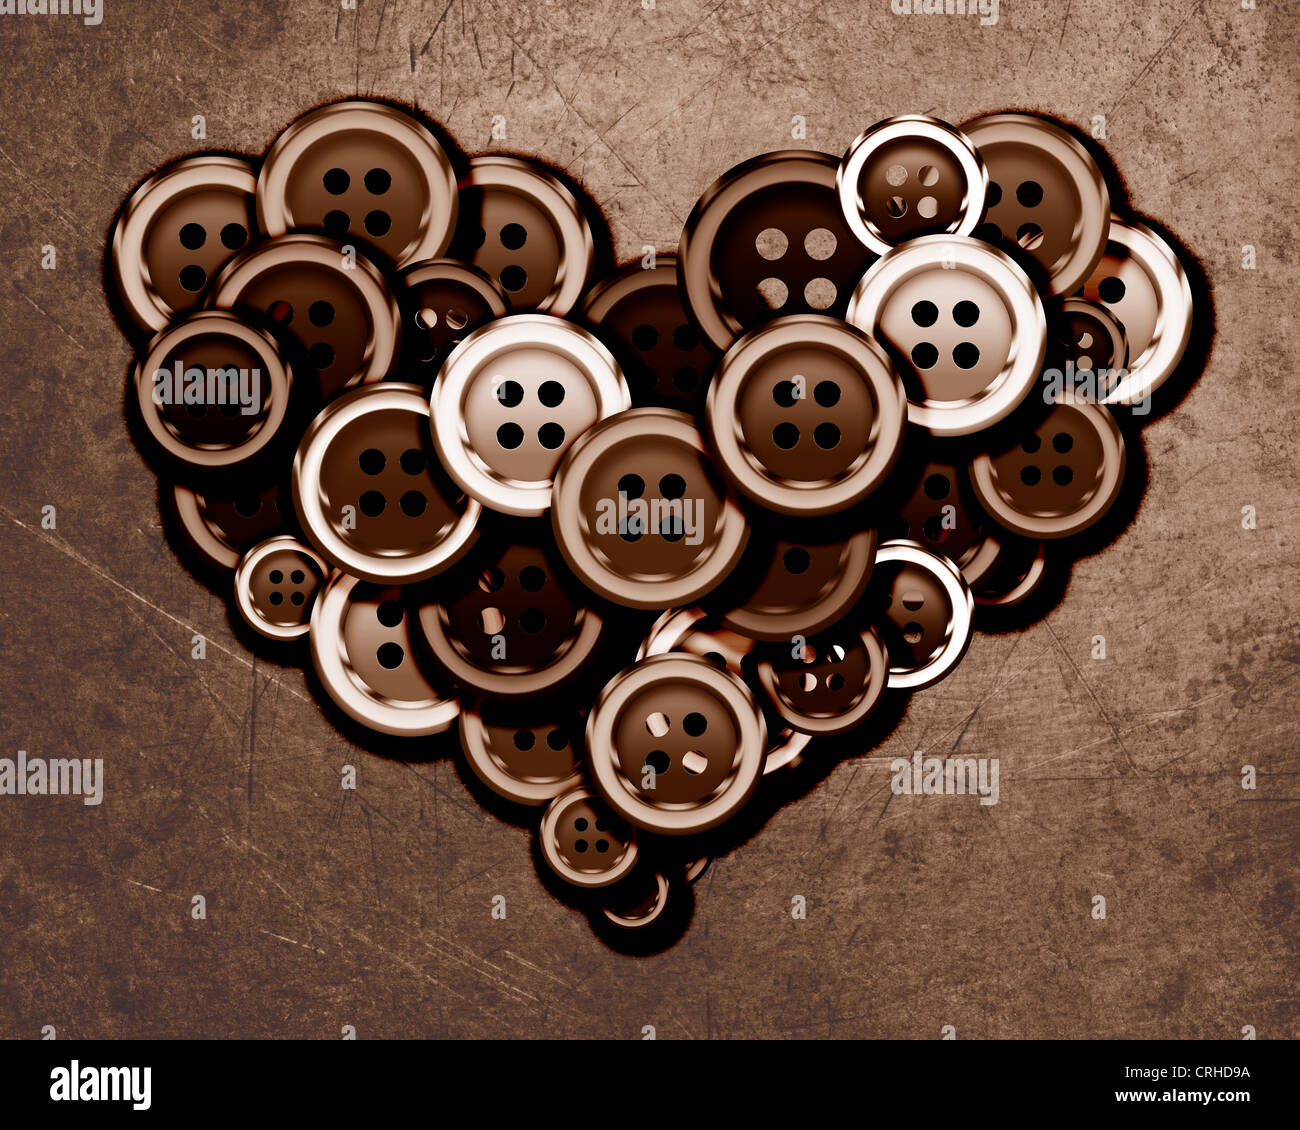 Cloth buttons, Love Heart formed from cloth buttons. Stock Photo